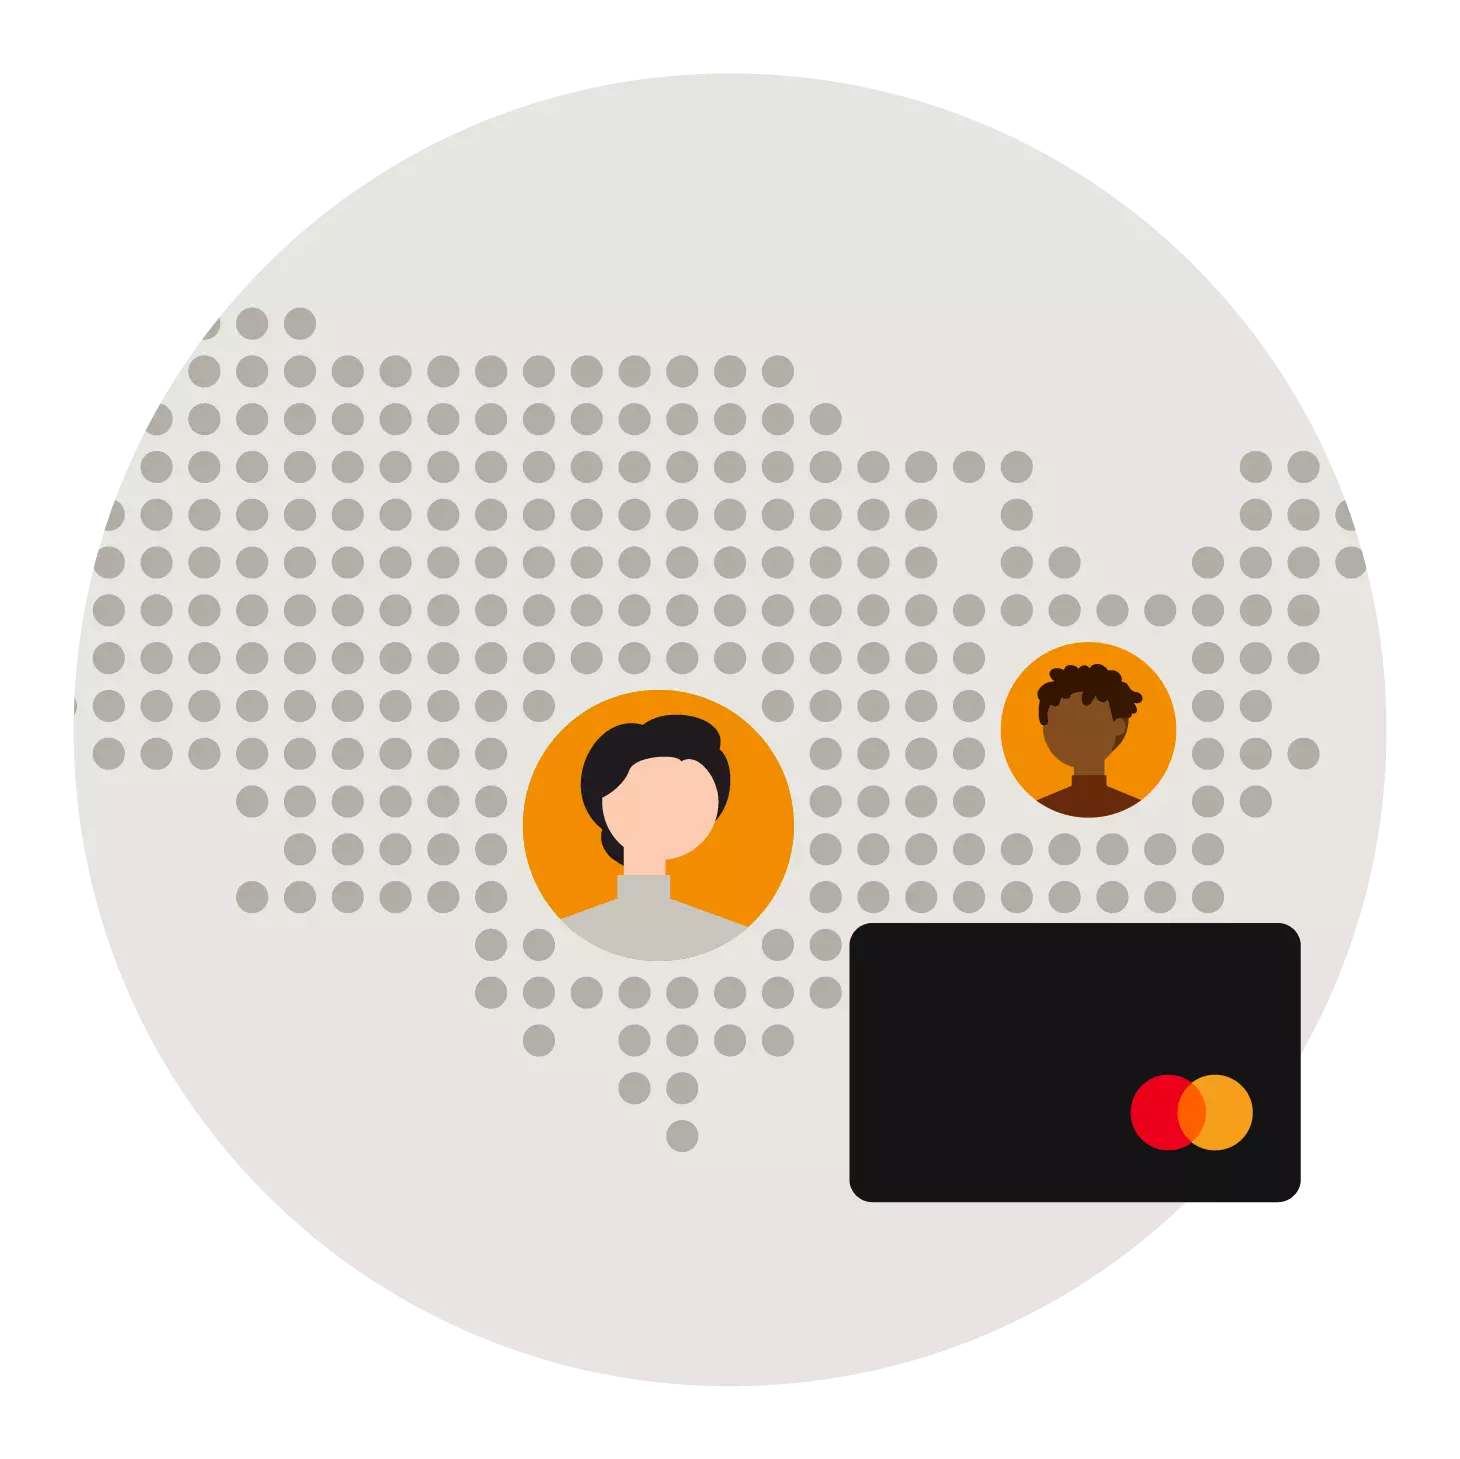 Card Labs access to Mastercard expertise